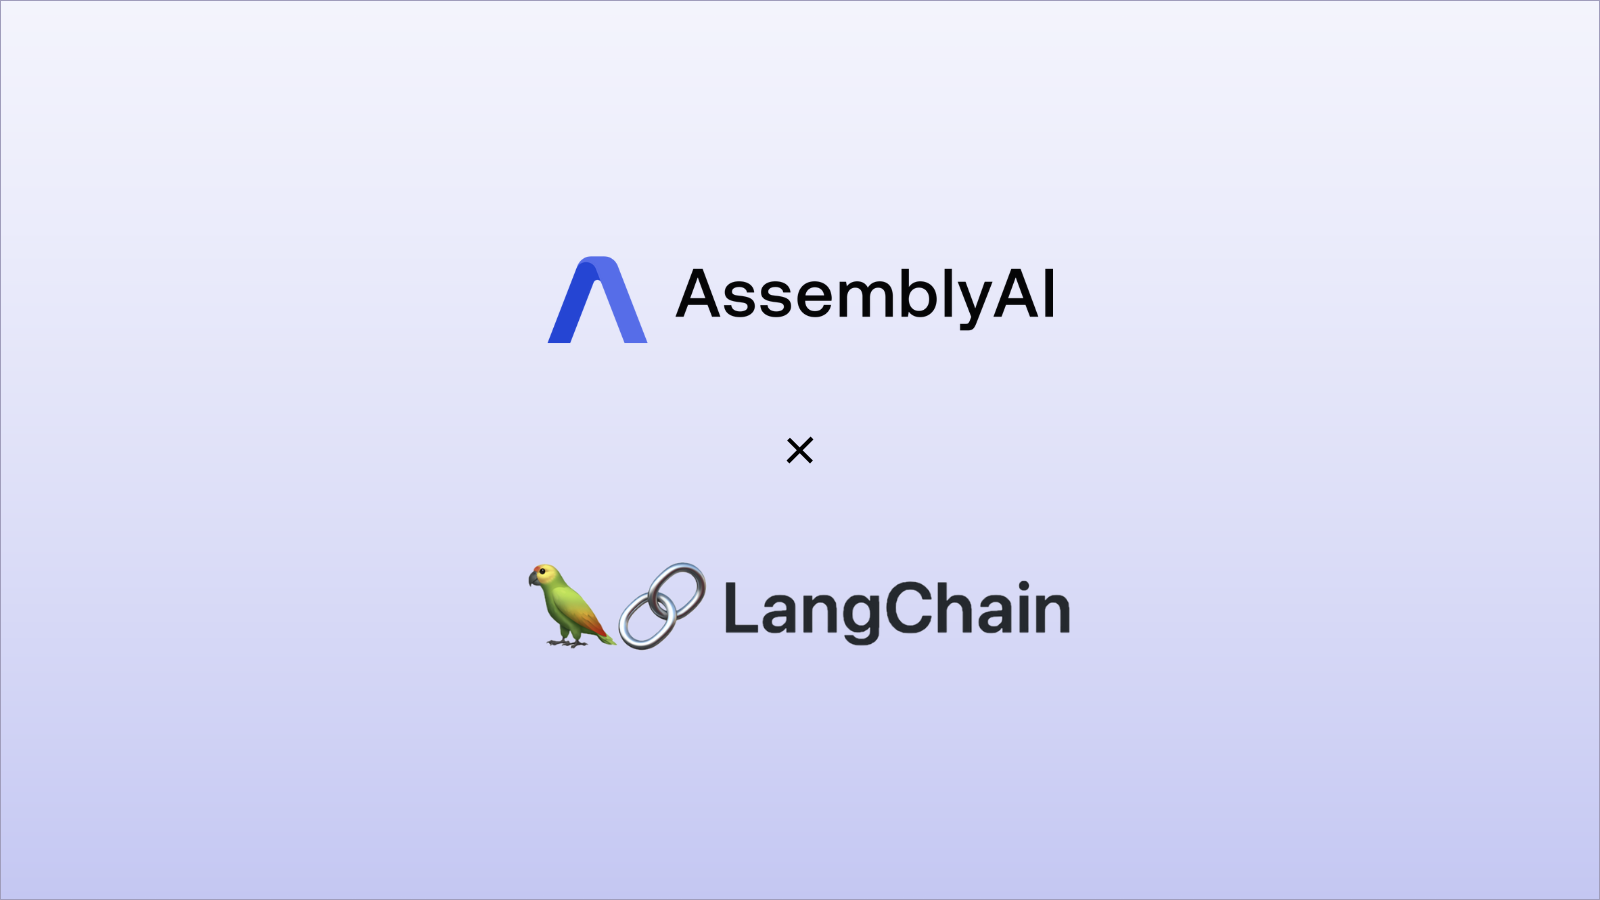 Retrieval Augmented Generation on audio data with LangChain and Chroma